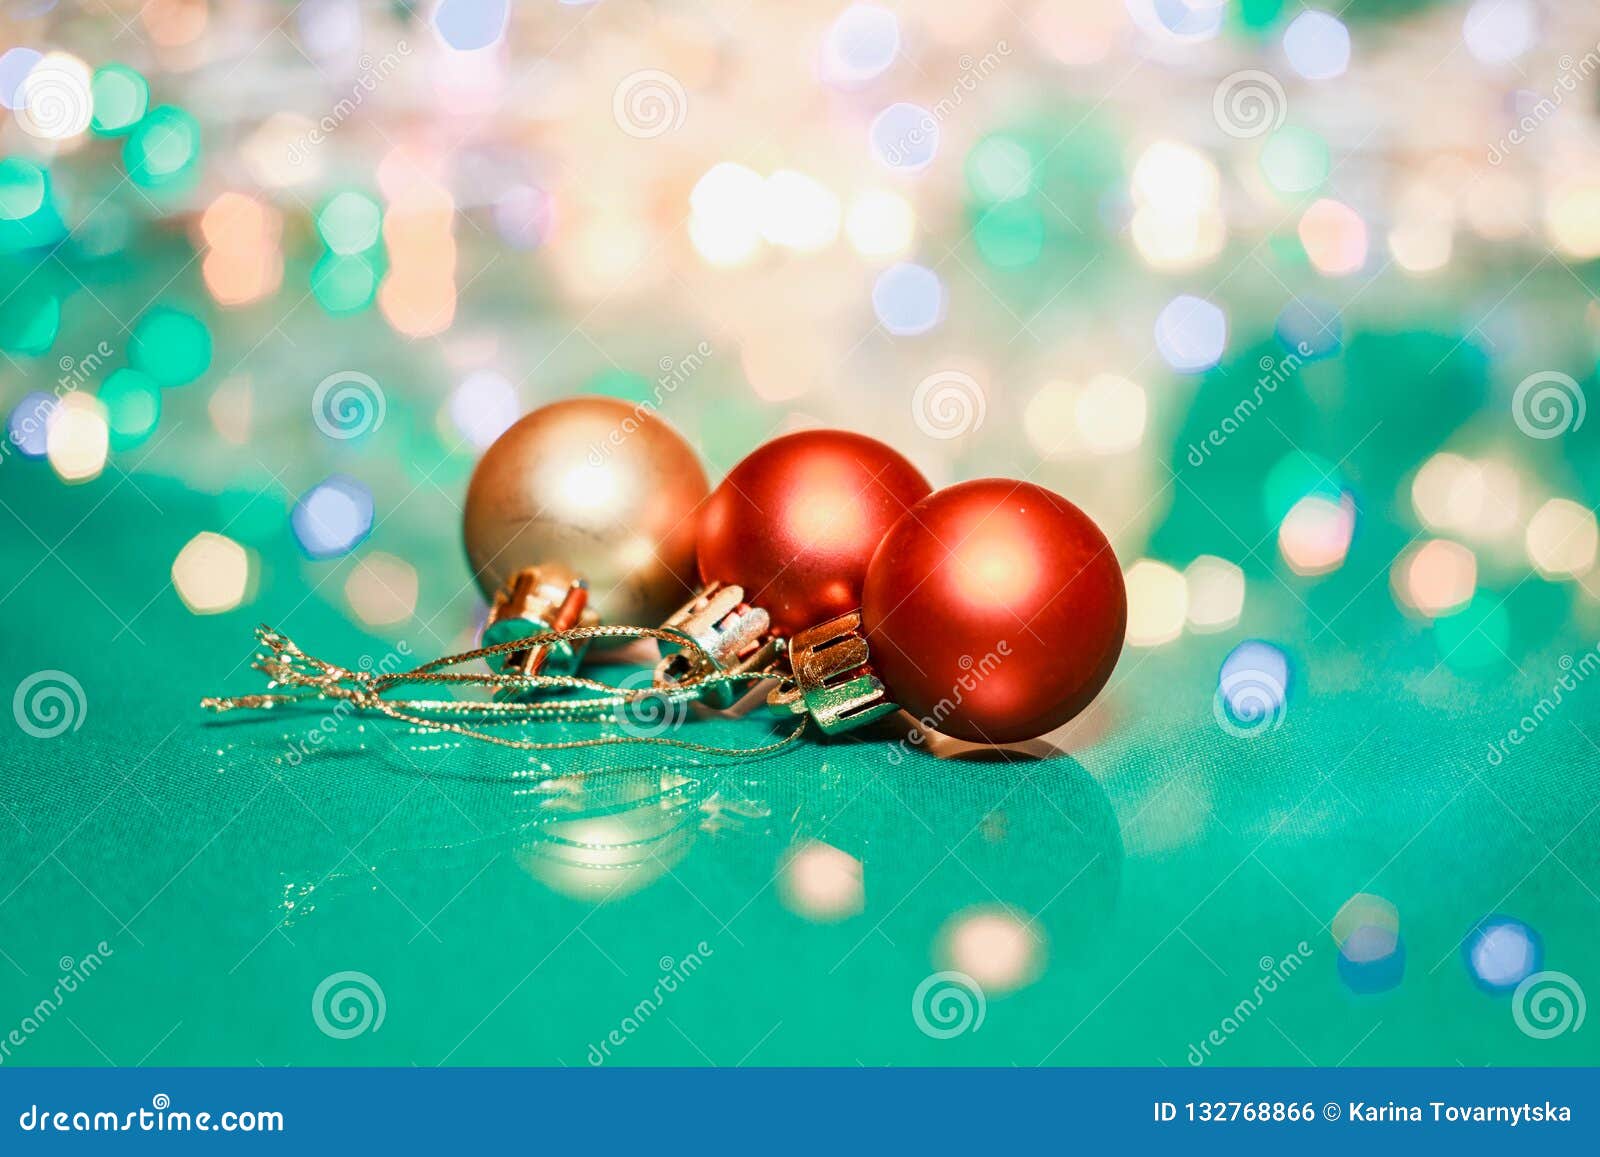 Red and Golden Balls and Lighted Festoon with Lanterns. Christmas ...